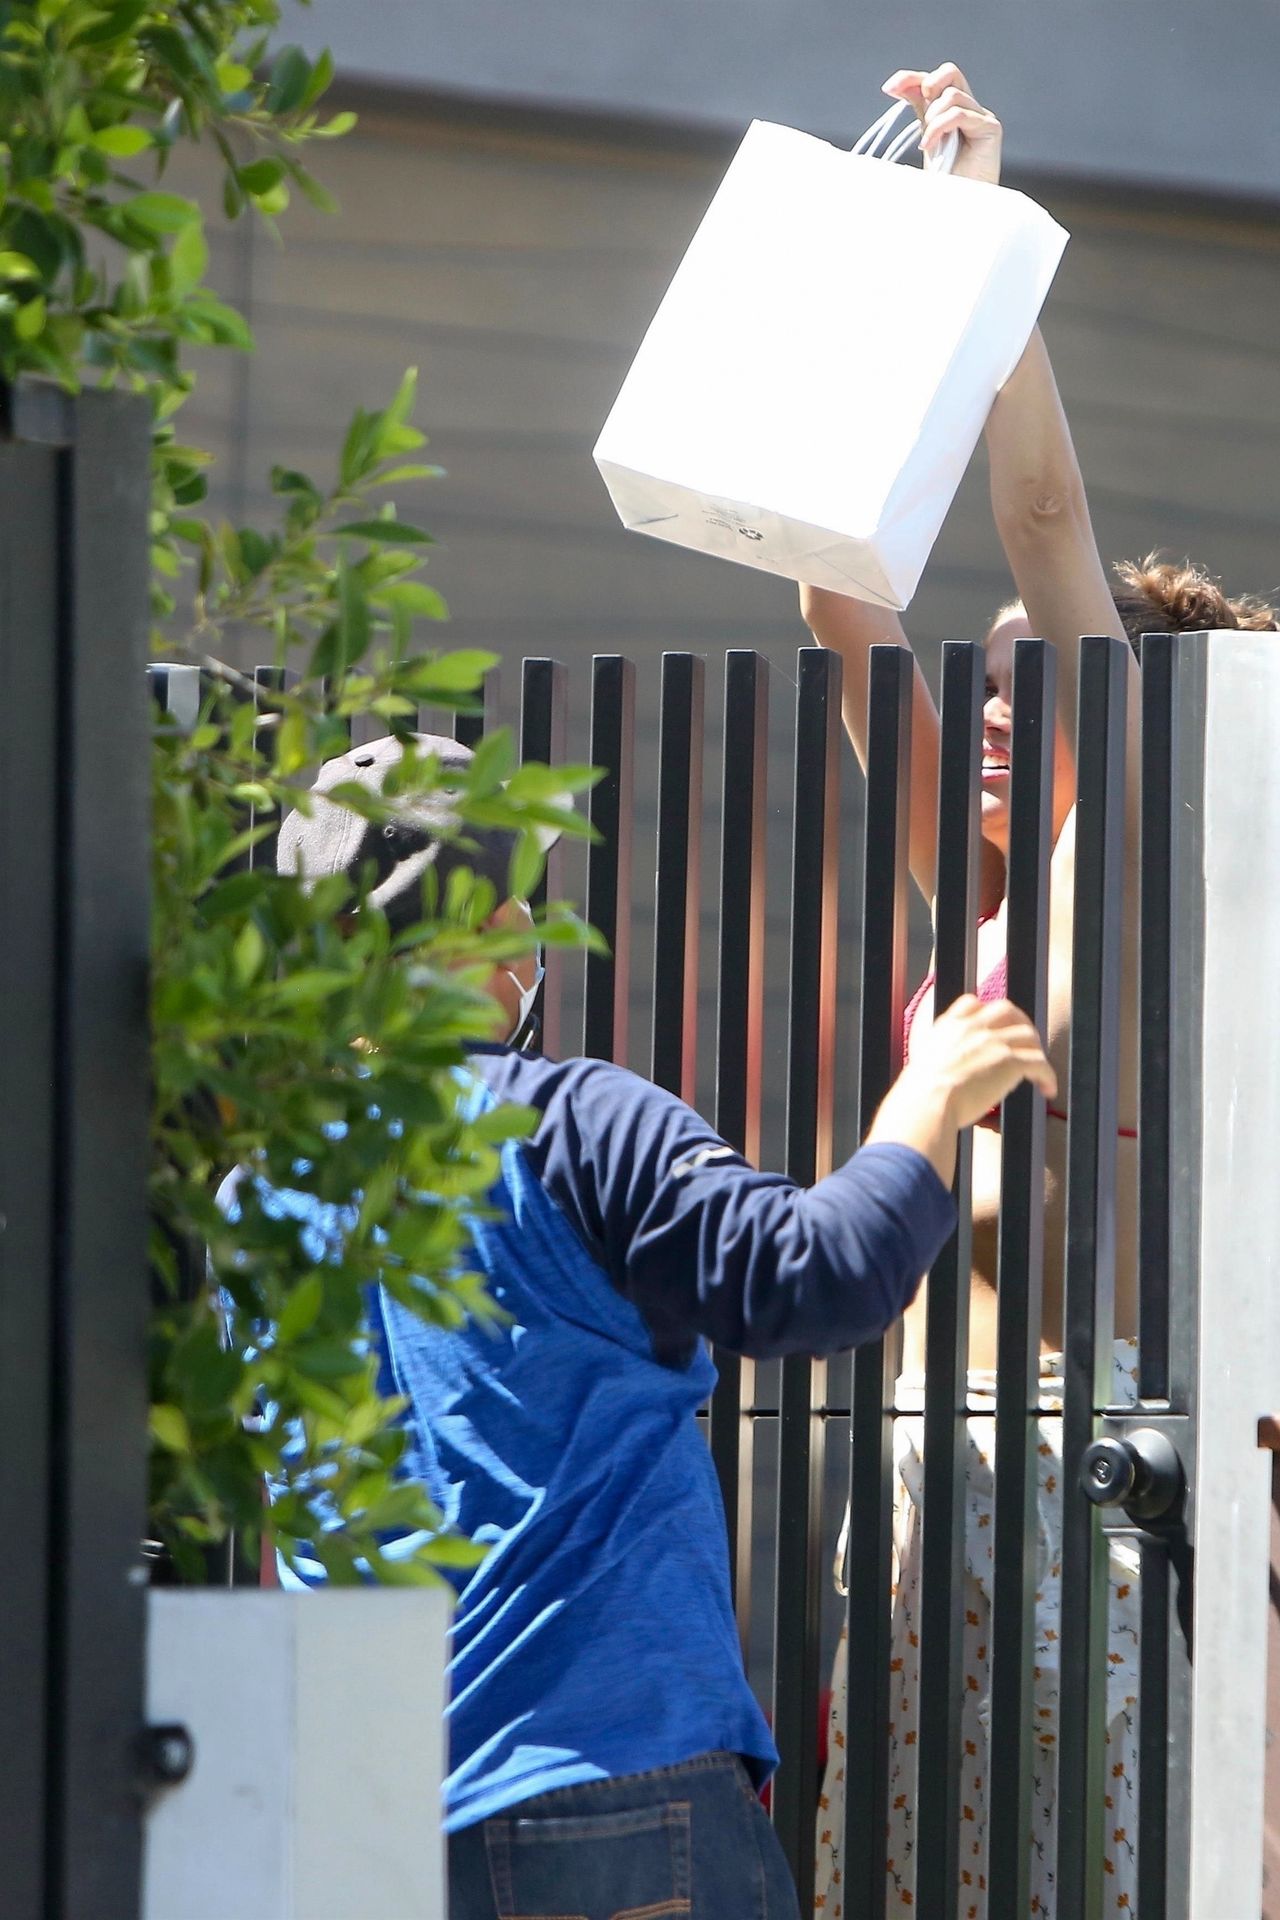 Sara Sampaio Greets the Delivery Guy in a Bikini as She Receives Her Lunch Order (11 Photos)